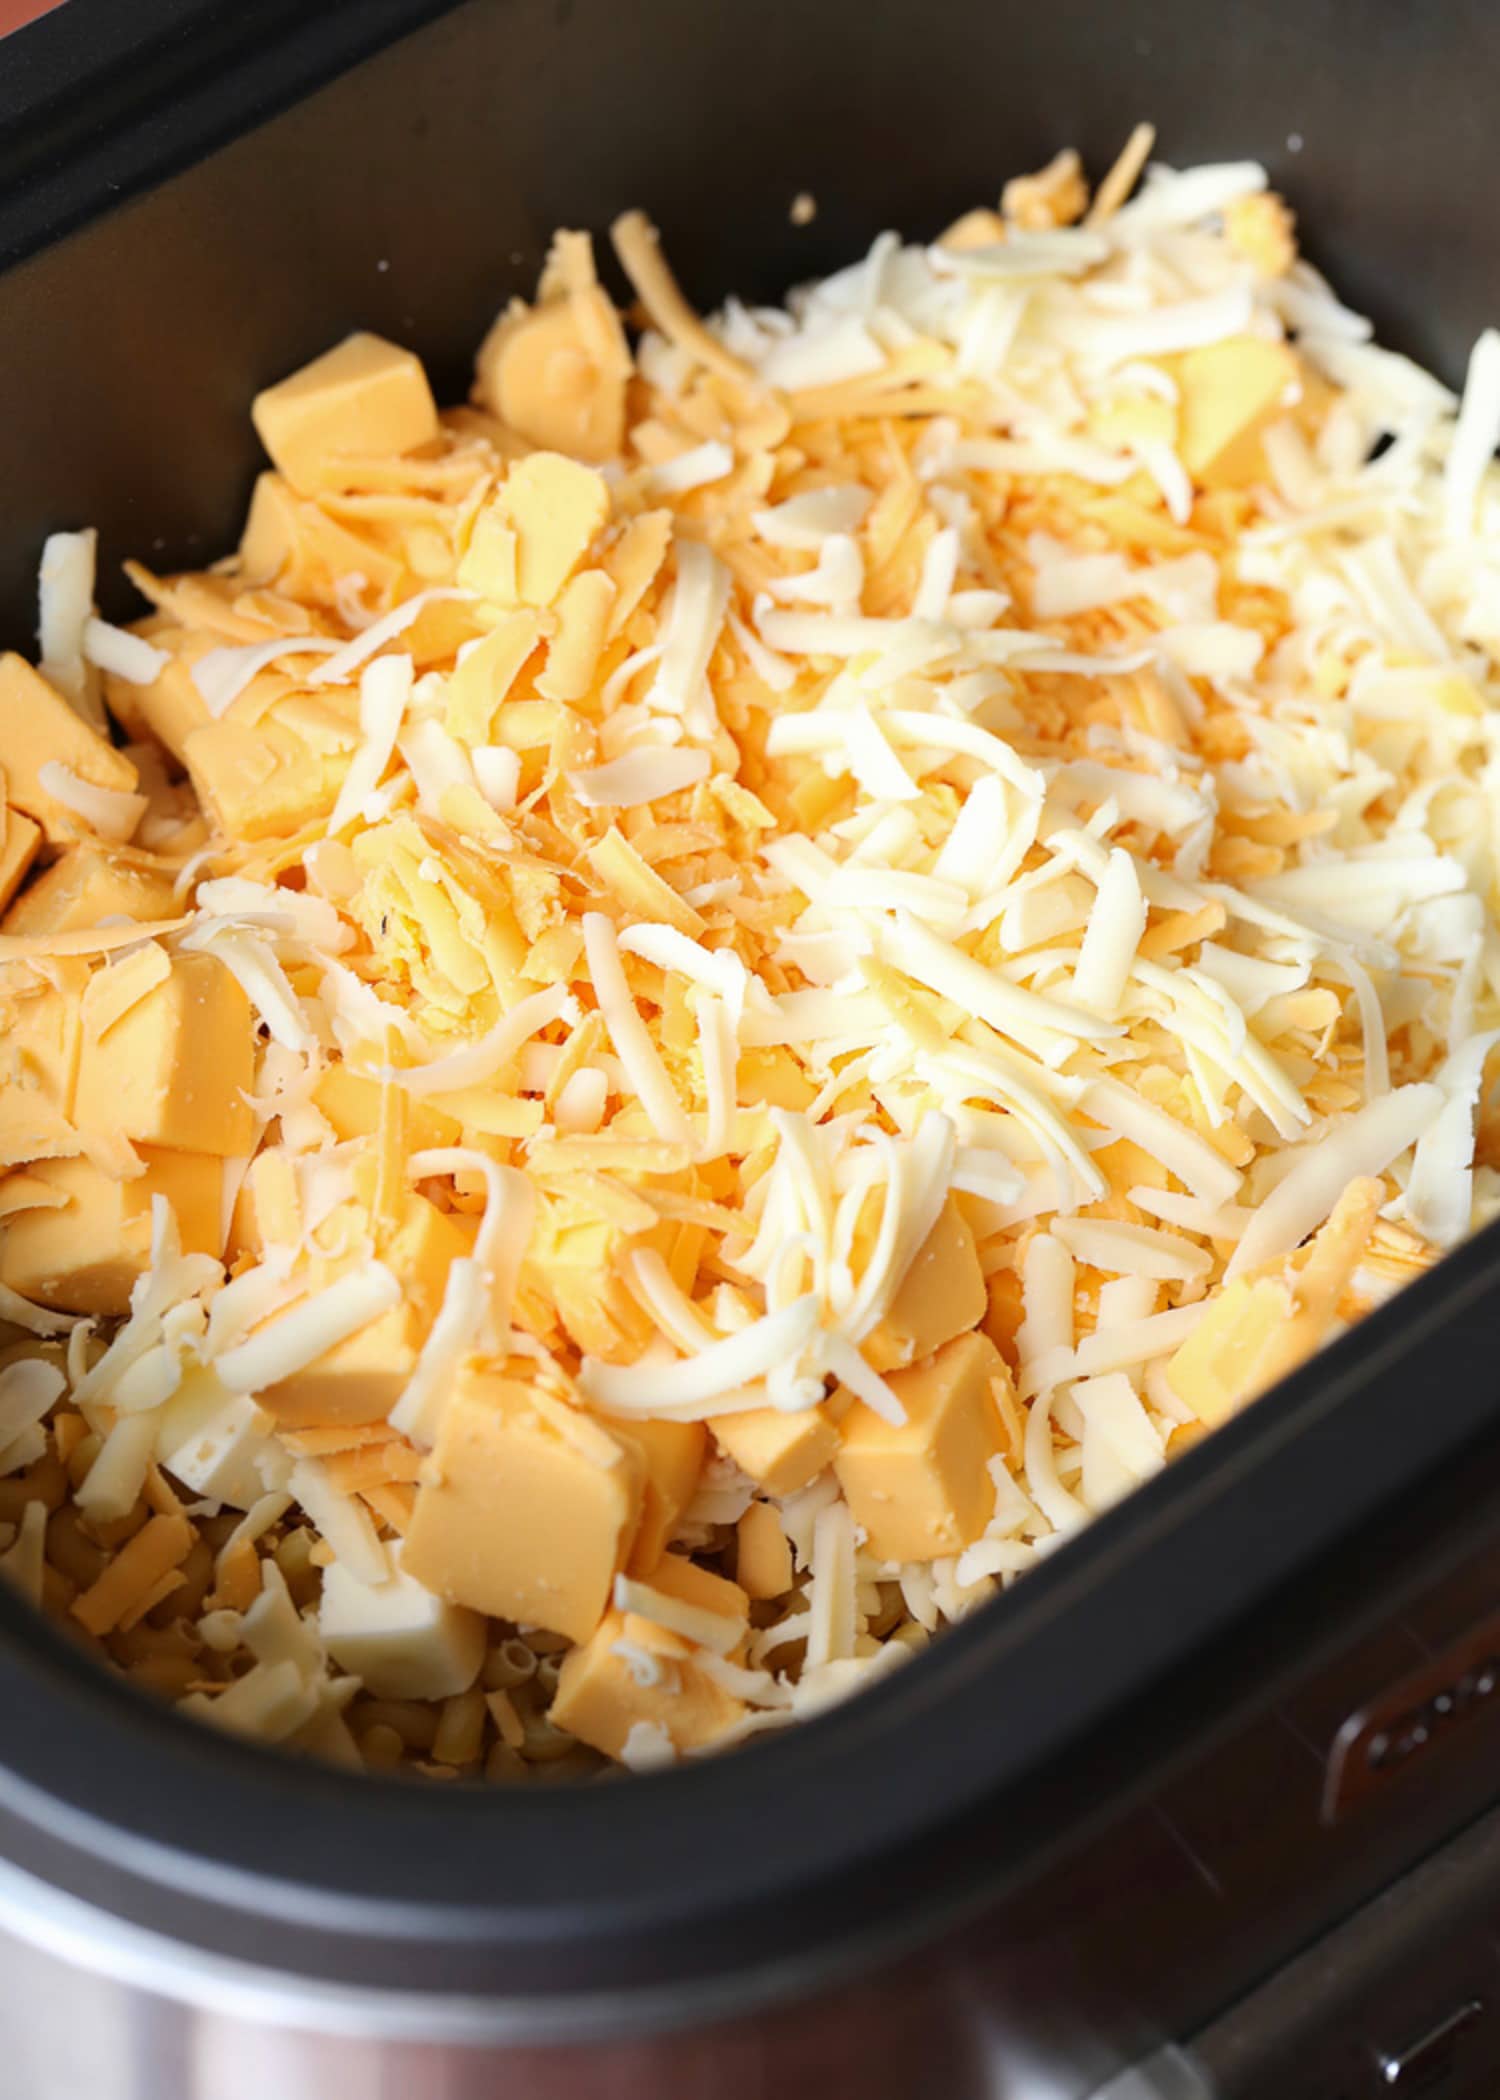 Grated cheese on top of pasta in a slow cooker prepping mac and cheese